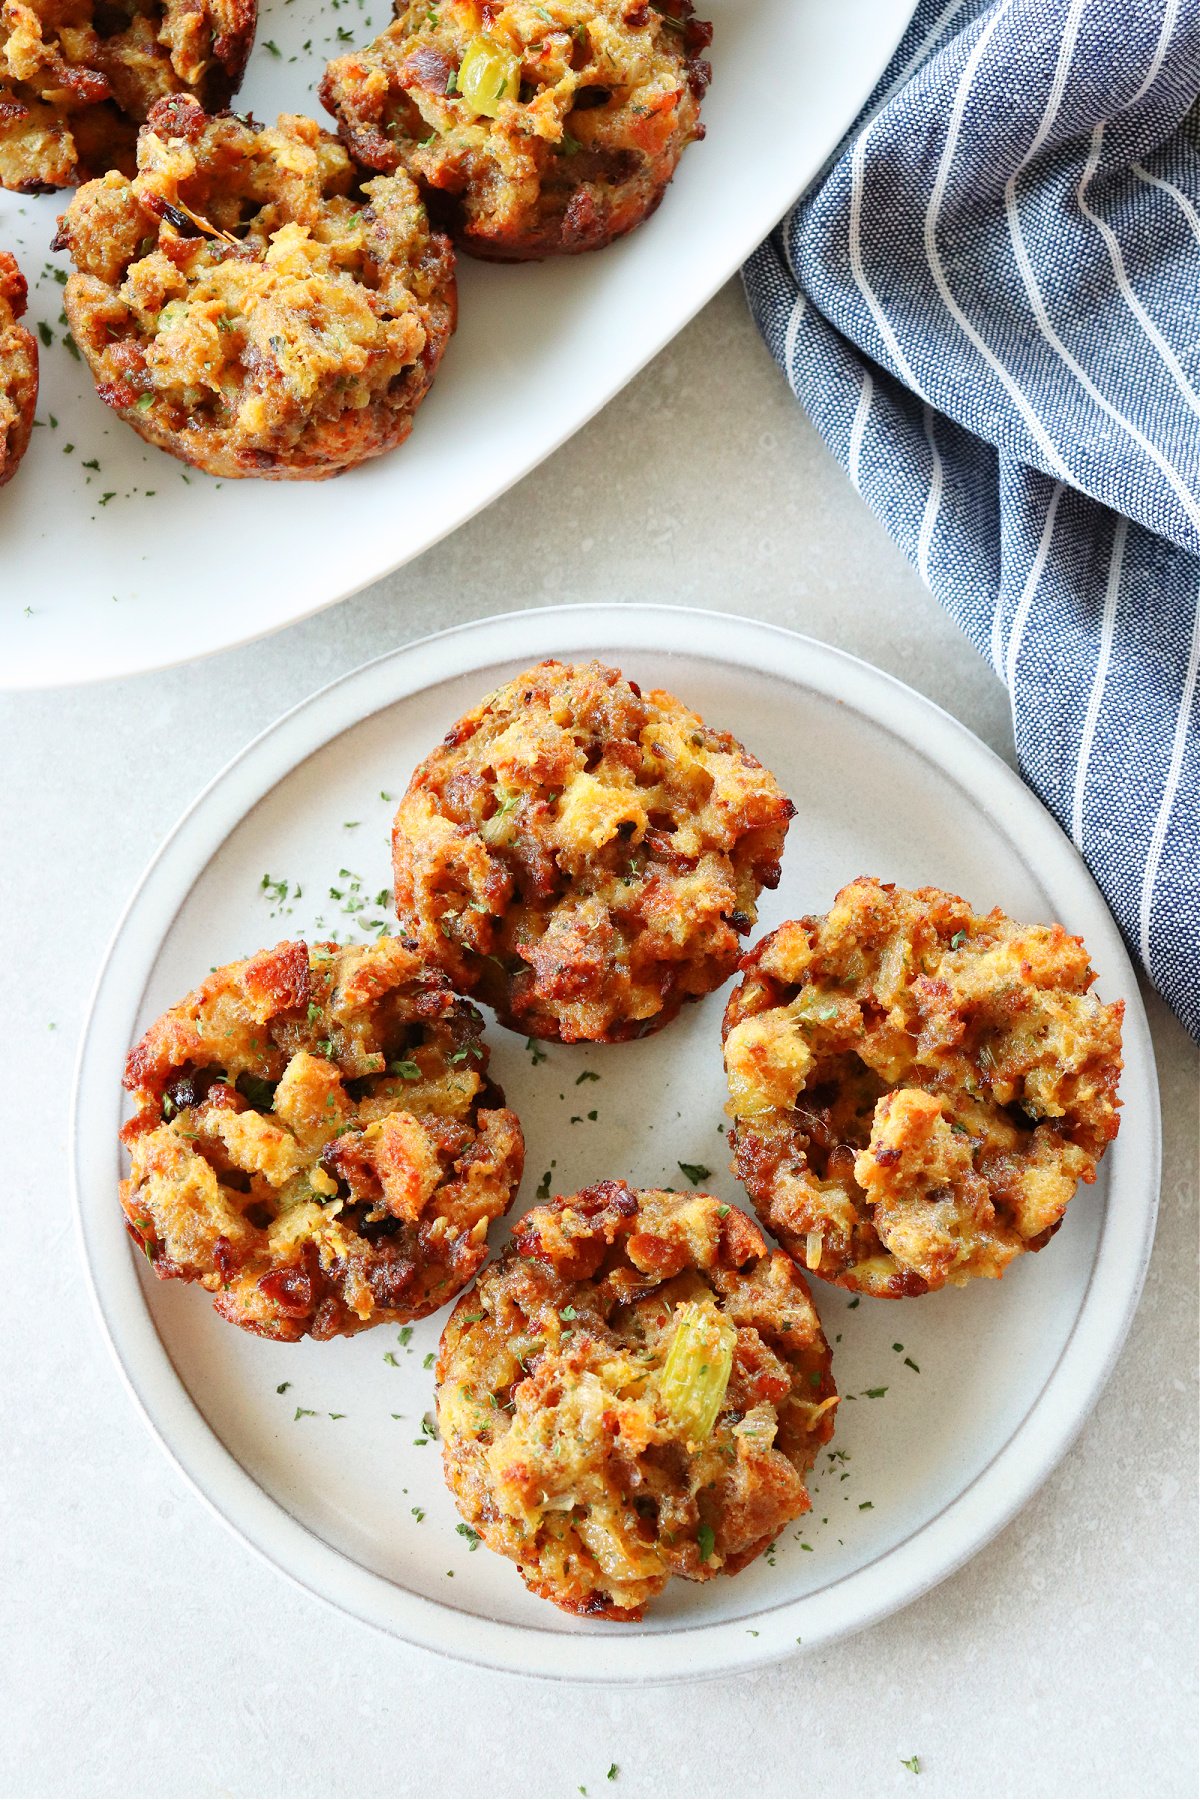 Four stuffing muffins on a plate with kitchen towel next to it.